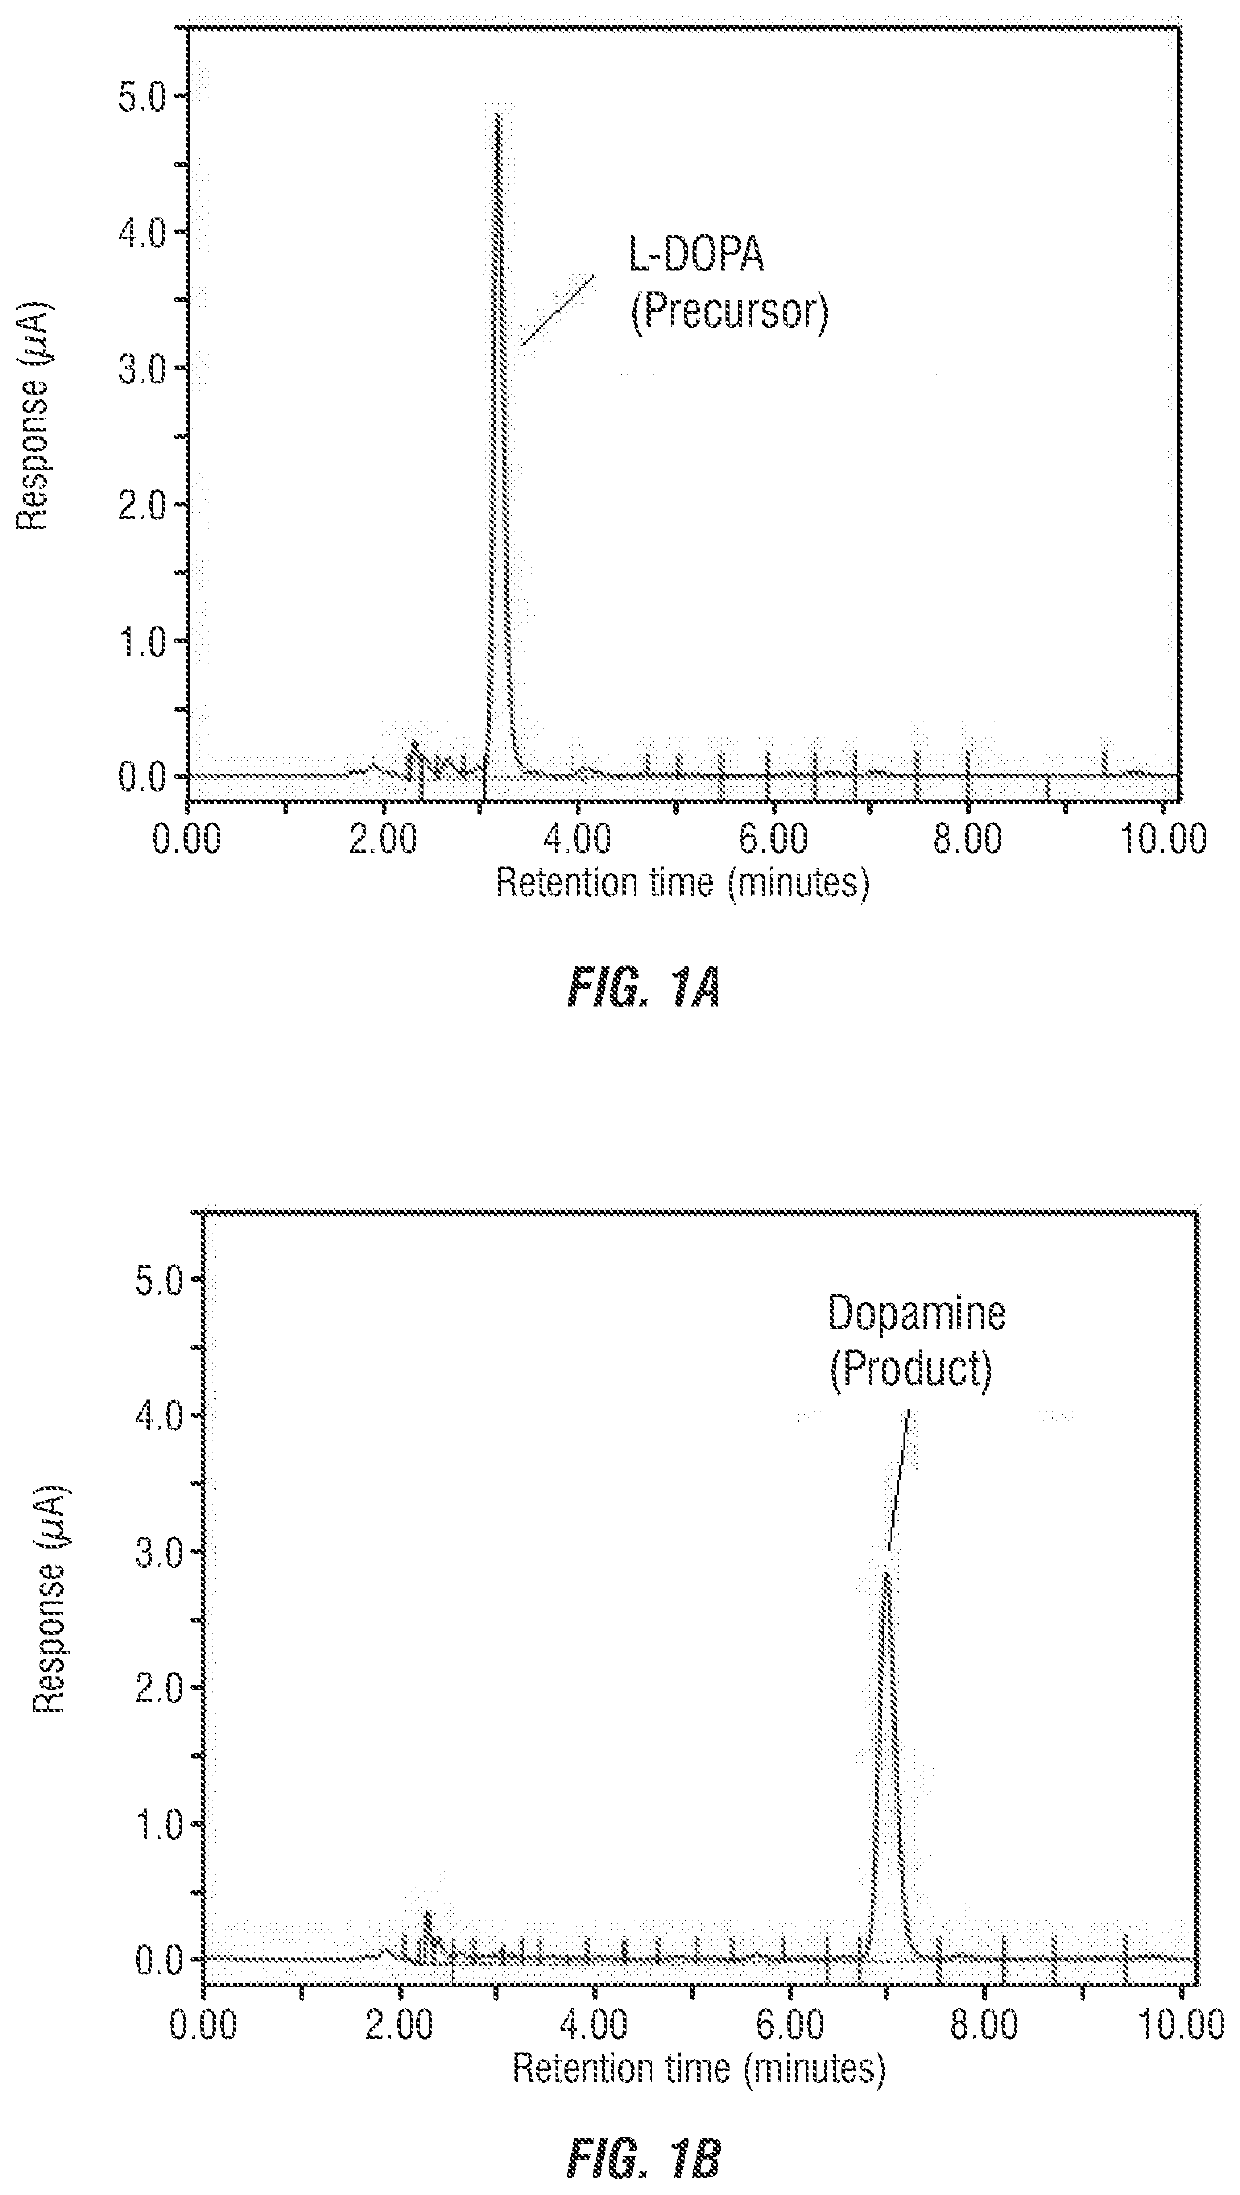 Probiotic compositions for production of dopamine